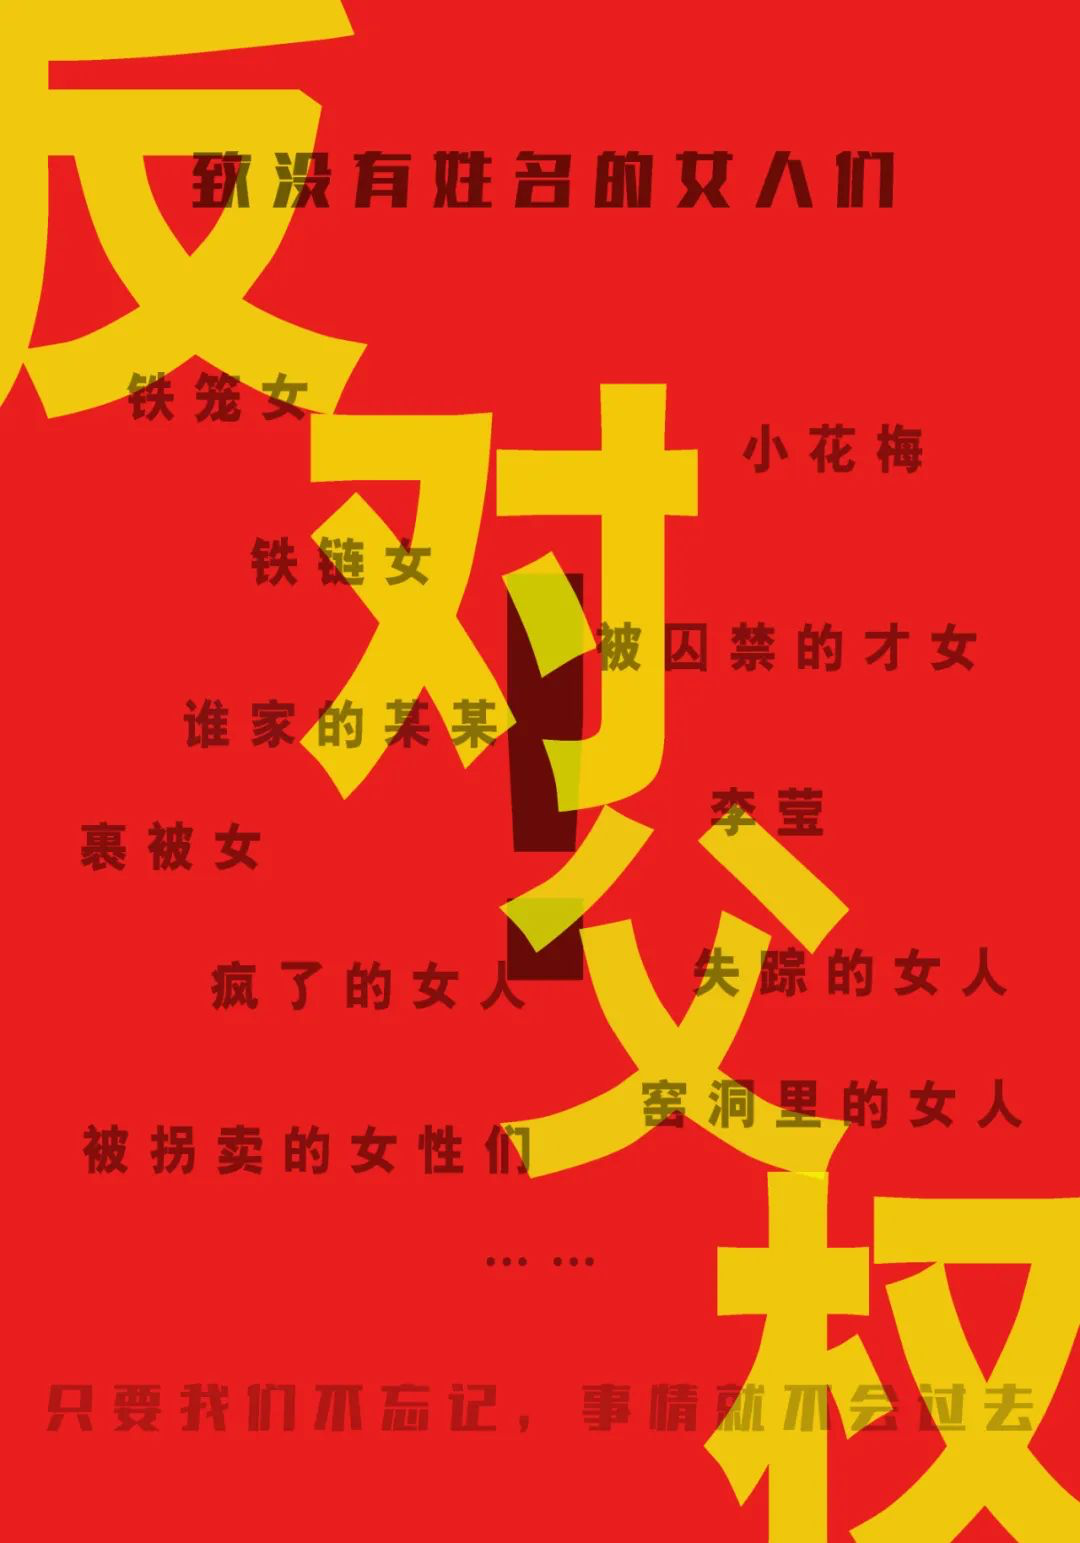 Red poster with the words “Fight the patriarchy” written diagonally across it, and this smaller text: “To all the unnamed women—the caged woman, Xiaohuamei, the chained woman, the captive girl-genius, so-and-so from such-and-such family, the woman in the quilt, Li Ying, the crazy woman, the missing woman, the abducted women, the woman in the cave—as long as we don't forget you, they won’t be able to sweep this under the rug.”